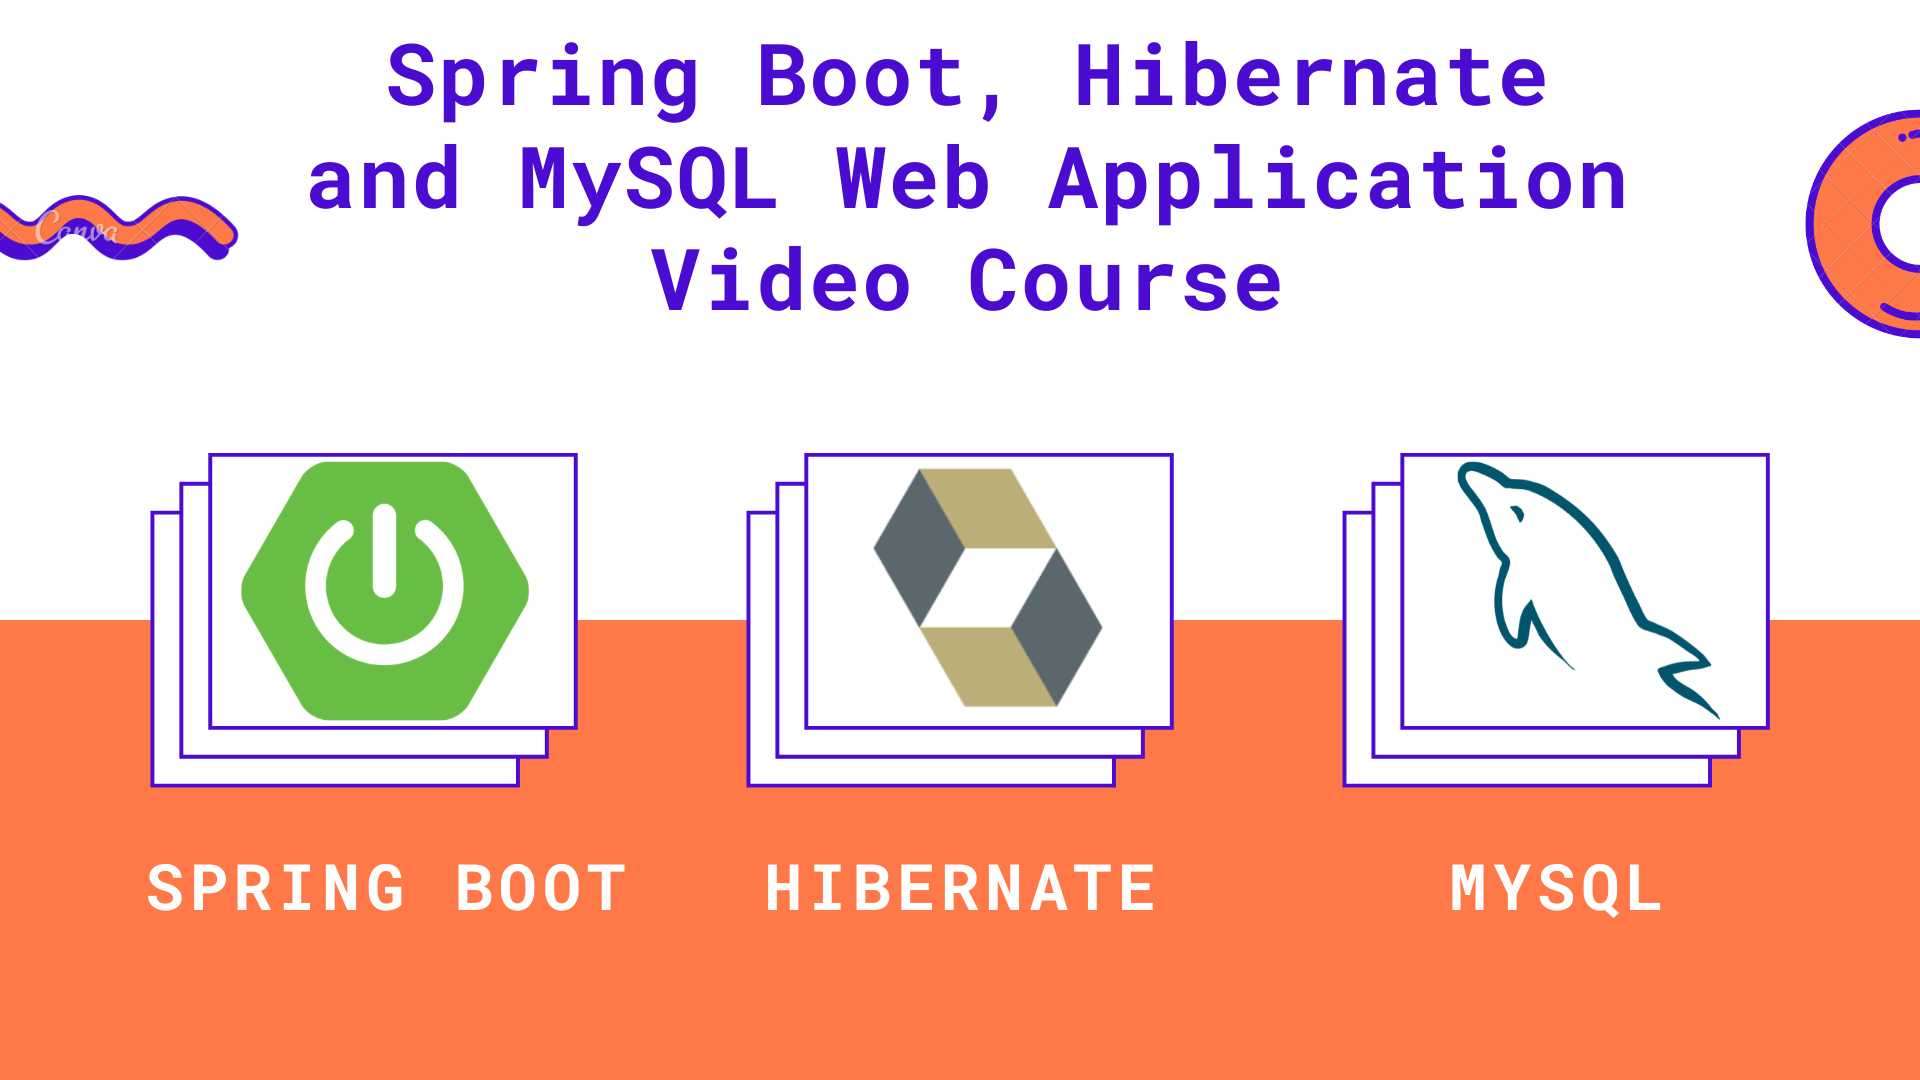 You are currently viewing Spring Boot, Hibernate and MySQL Web Application Video Course